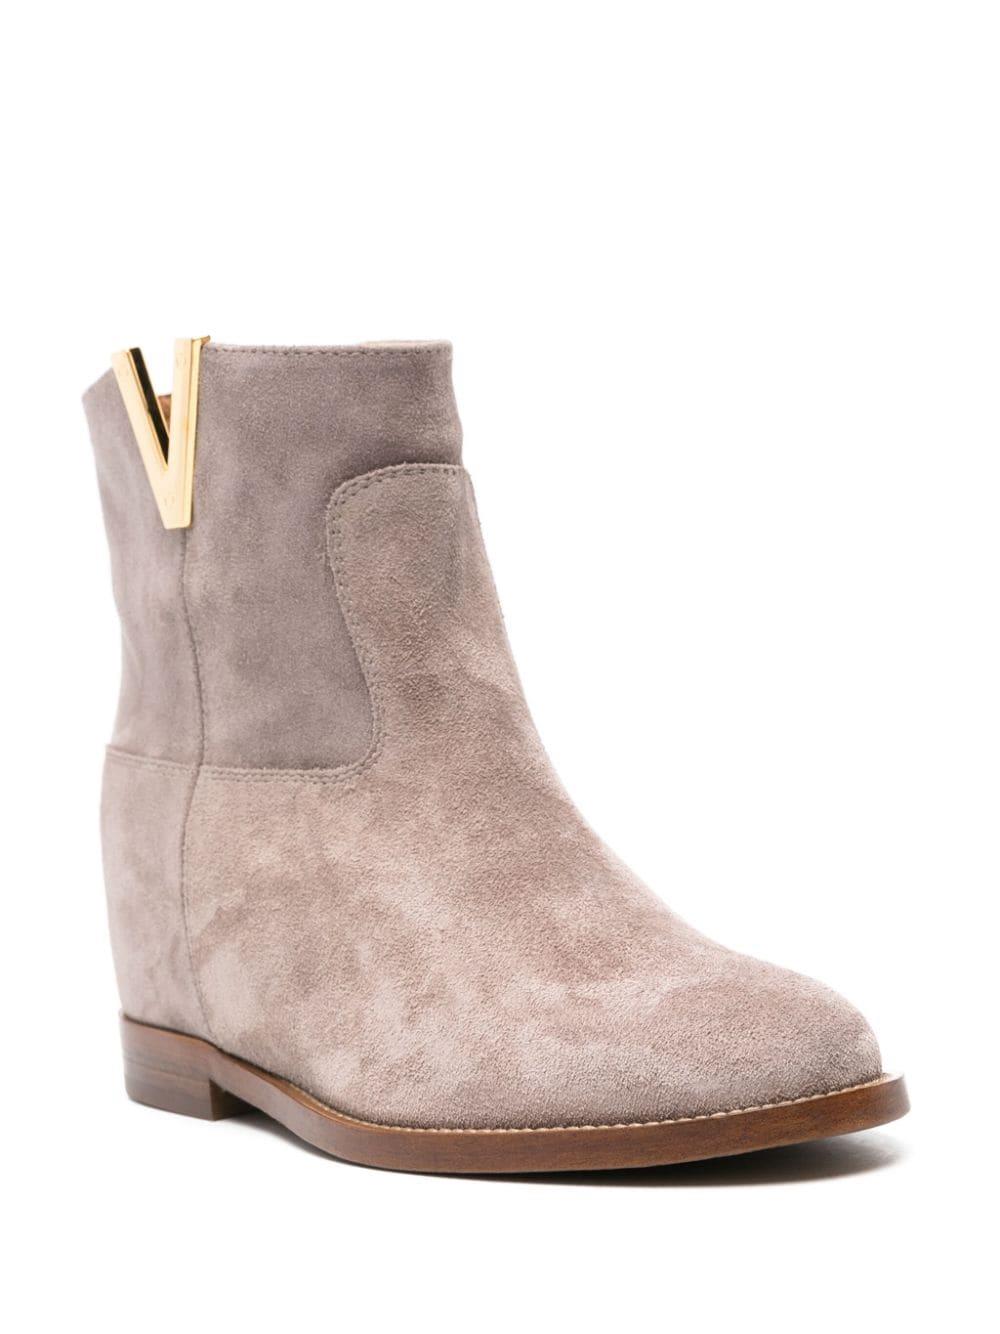 Via Roma 15 Stivale suede ankle boots - Neutrals